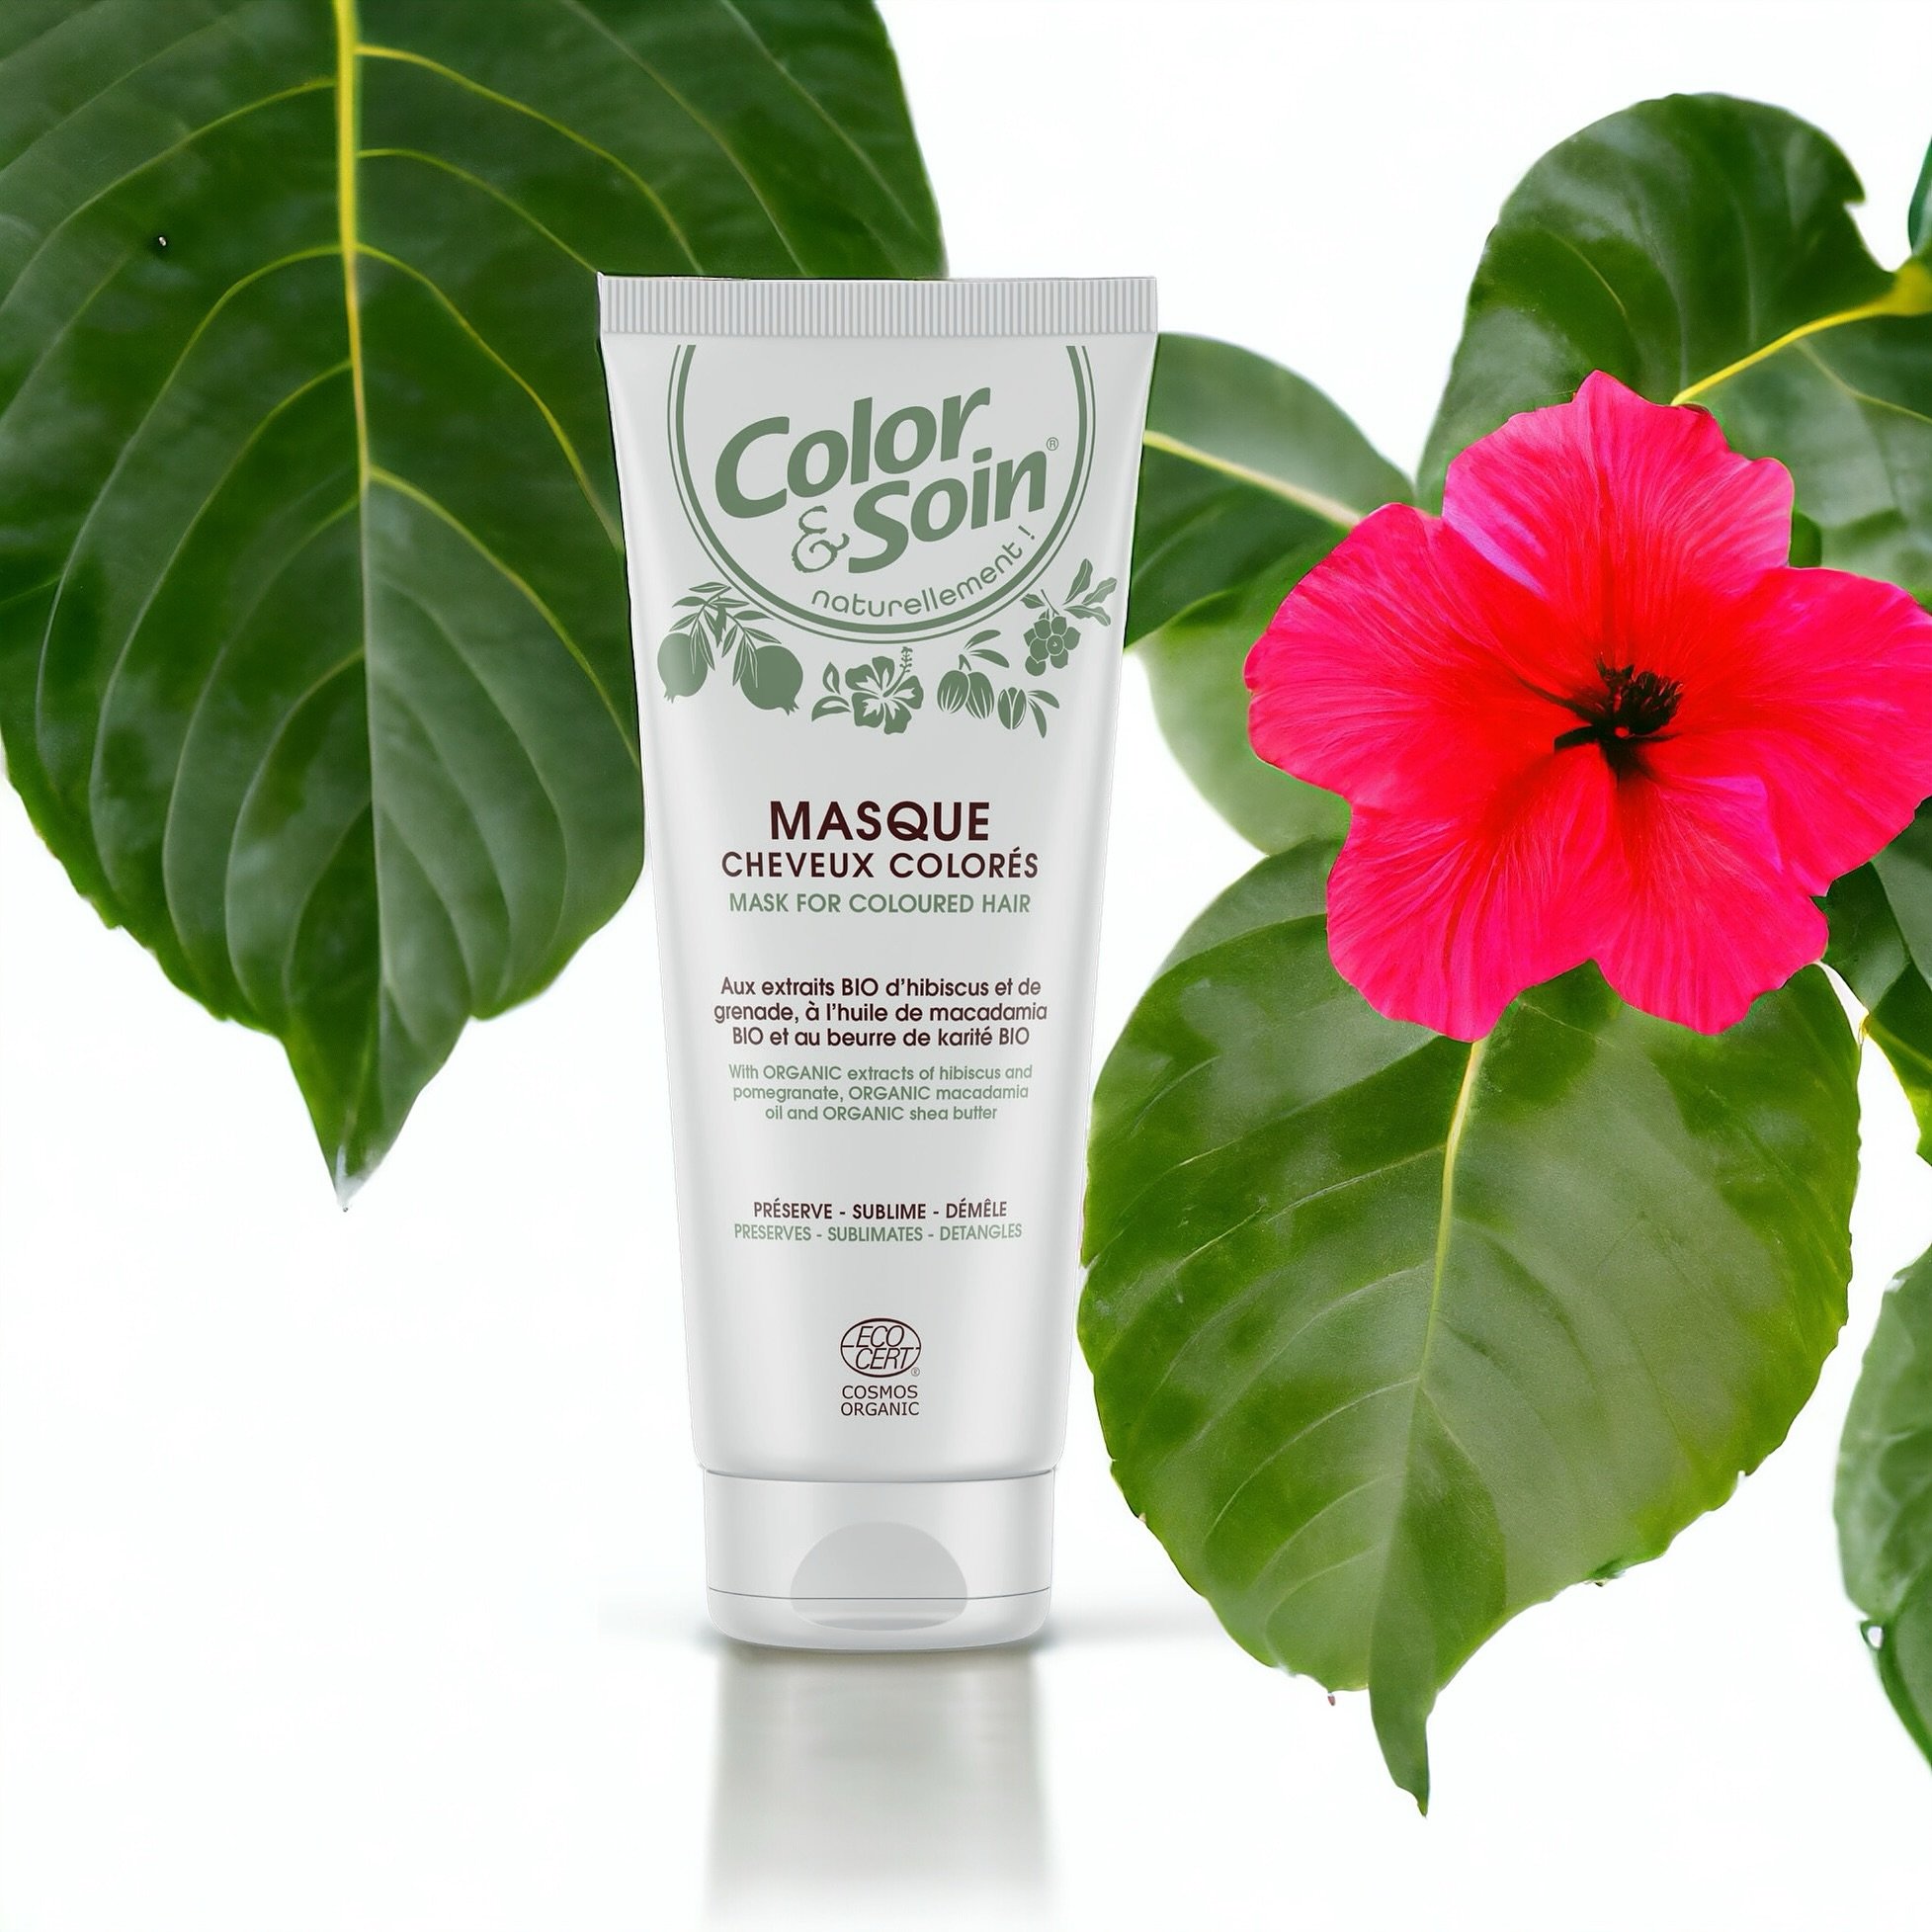 New @colorsoin.au Mask for coloured hair 💚

Nourishes and preserves coloured hair. Its rich and smooth texture eases detangle, prevents breakage and strengthens hair to reveal a radiant shine and infinite softness.

Includes 🌺 flower extract, enhan